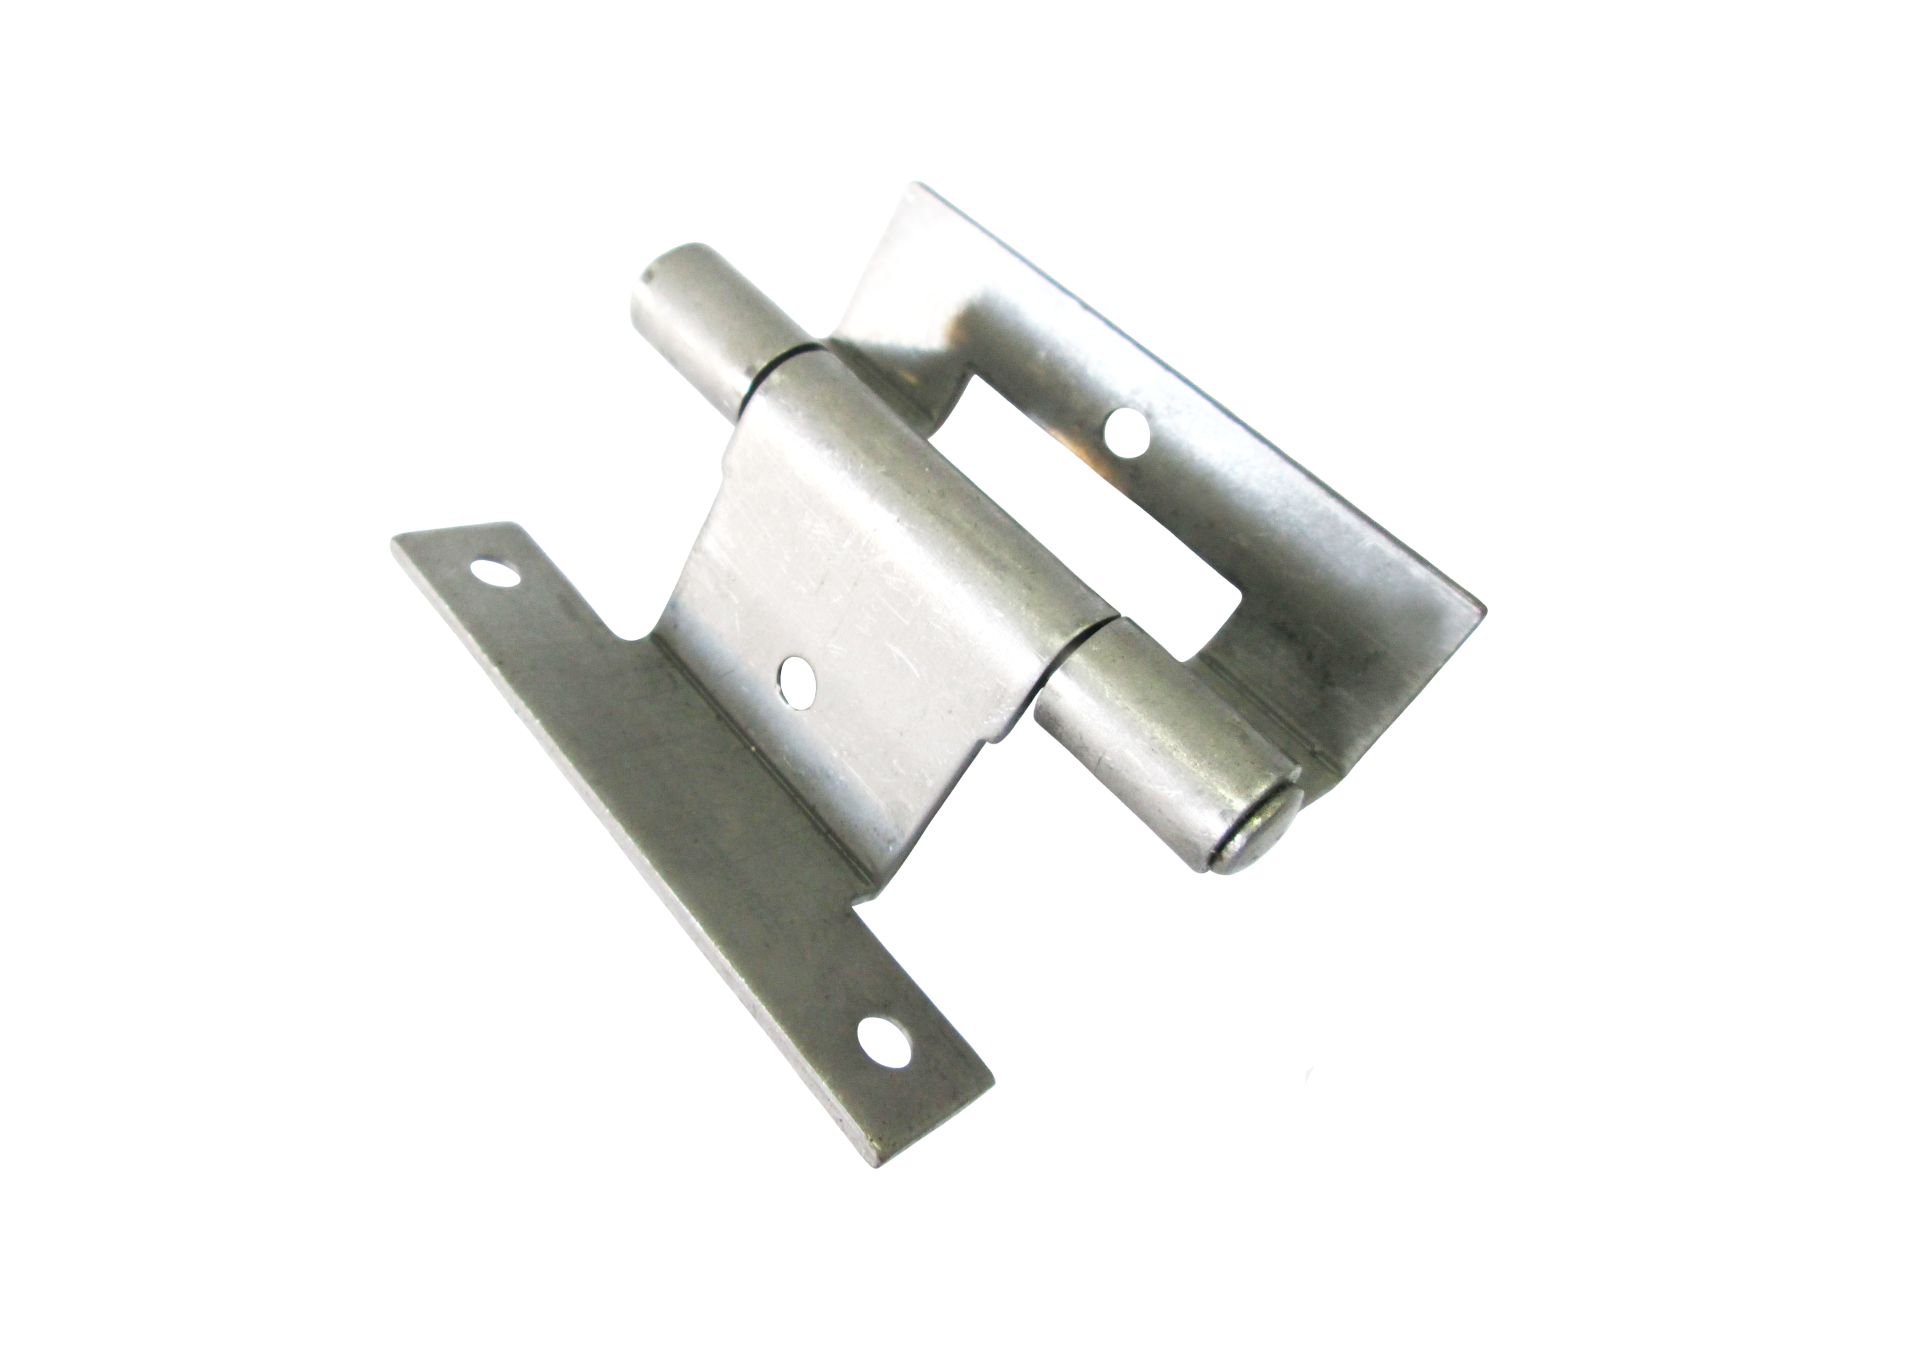 Non-Mortise Hinges (3)